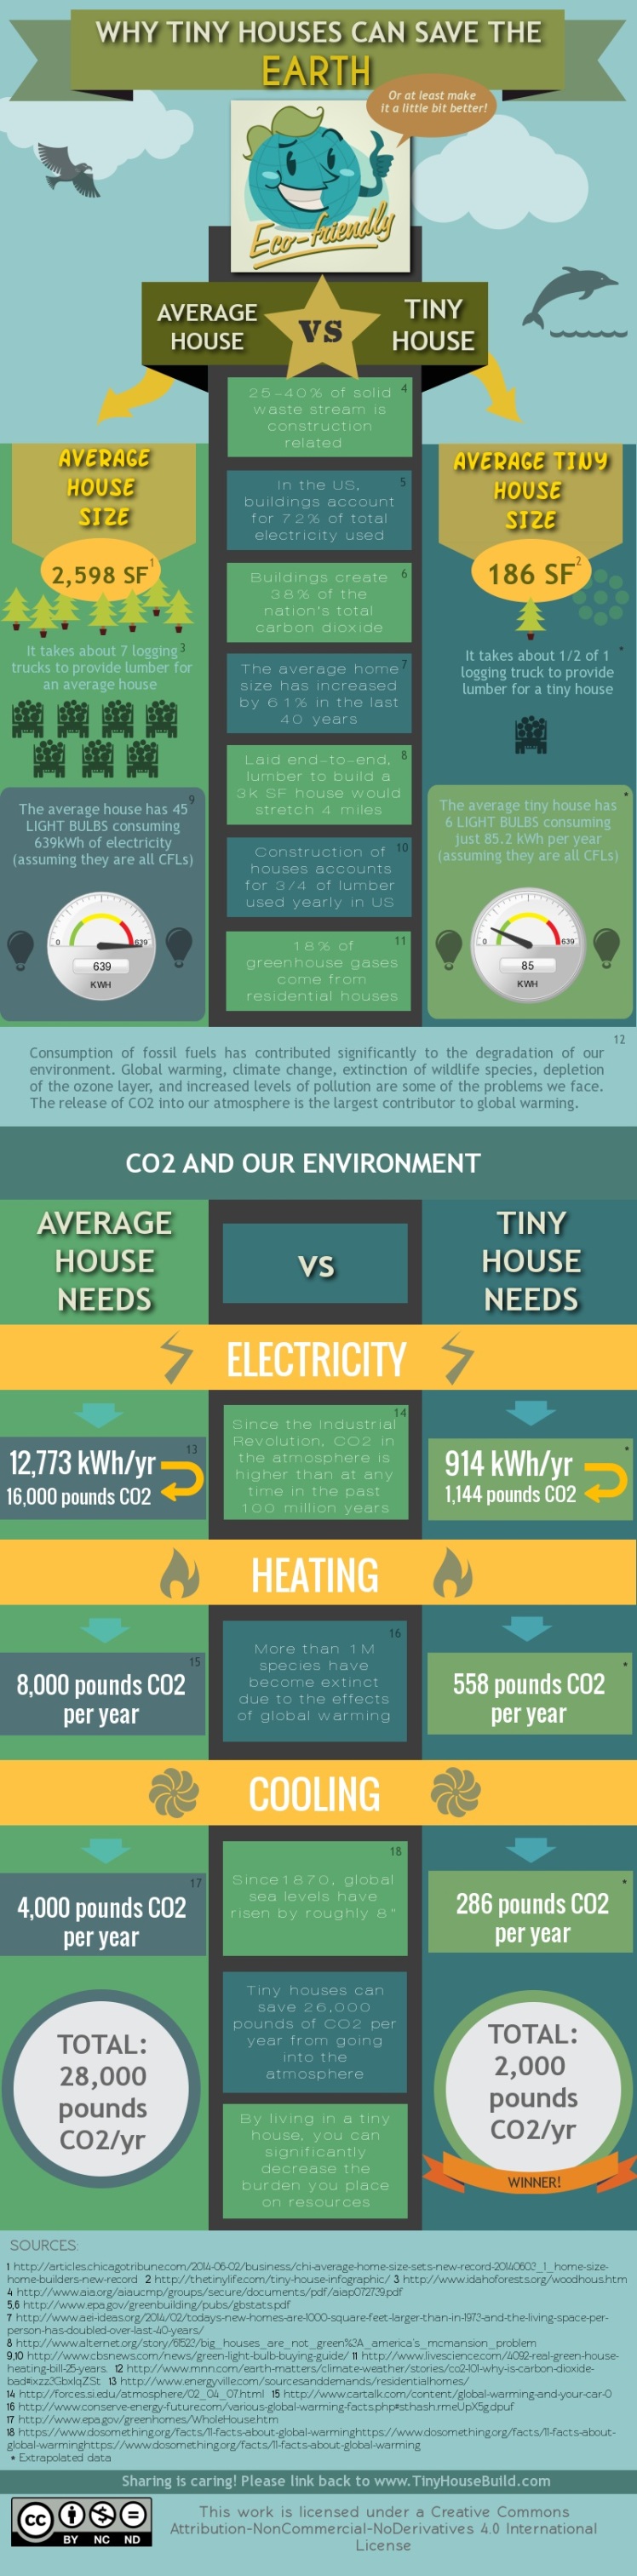 why-tiny-houses-can-save-earth-infographic